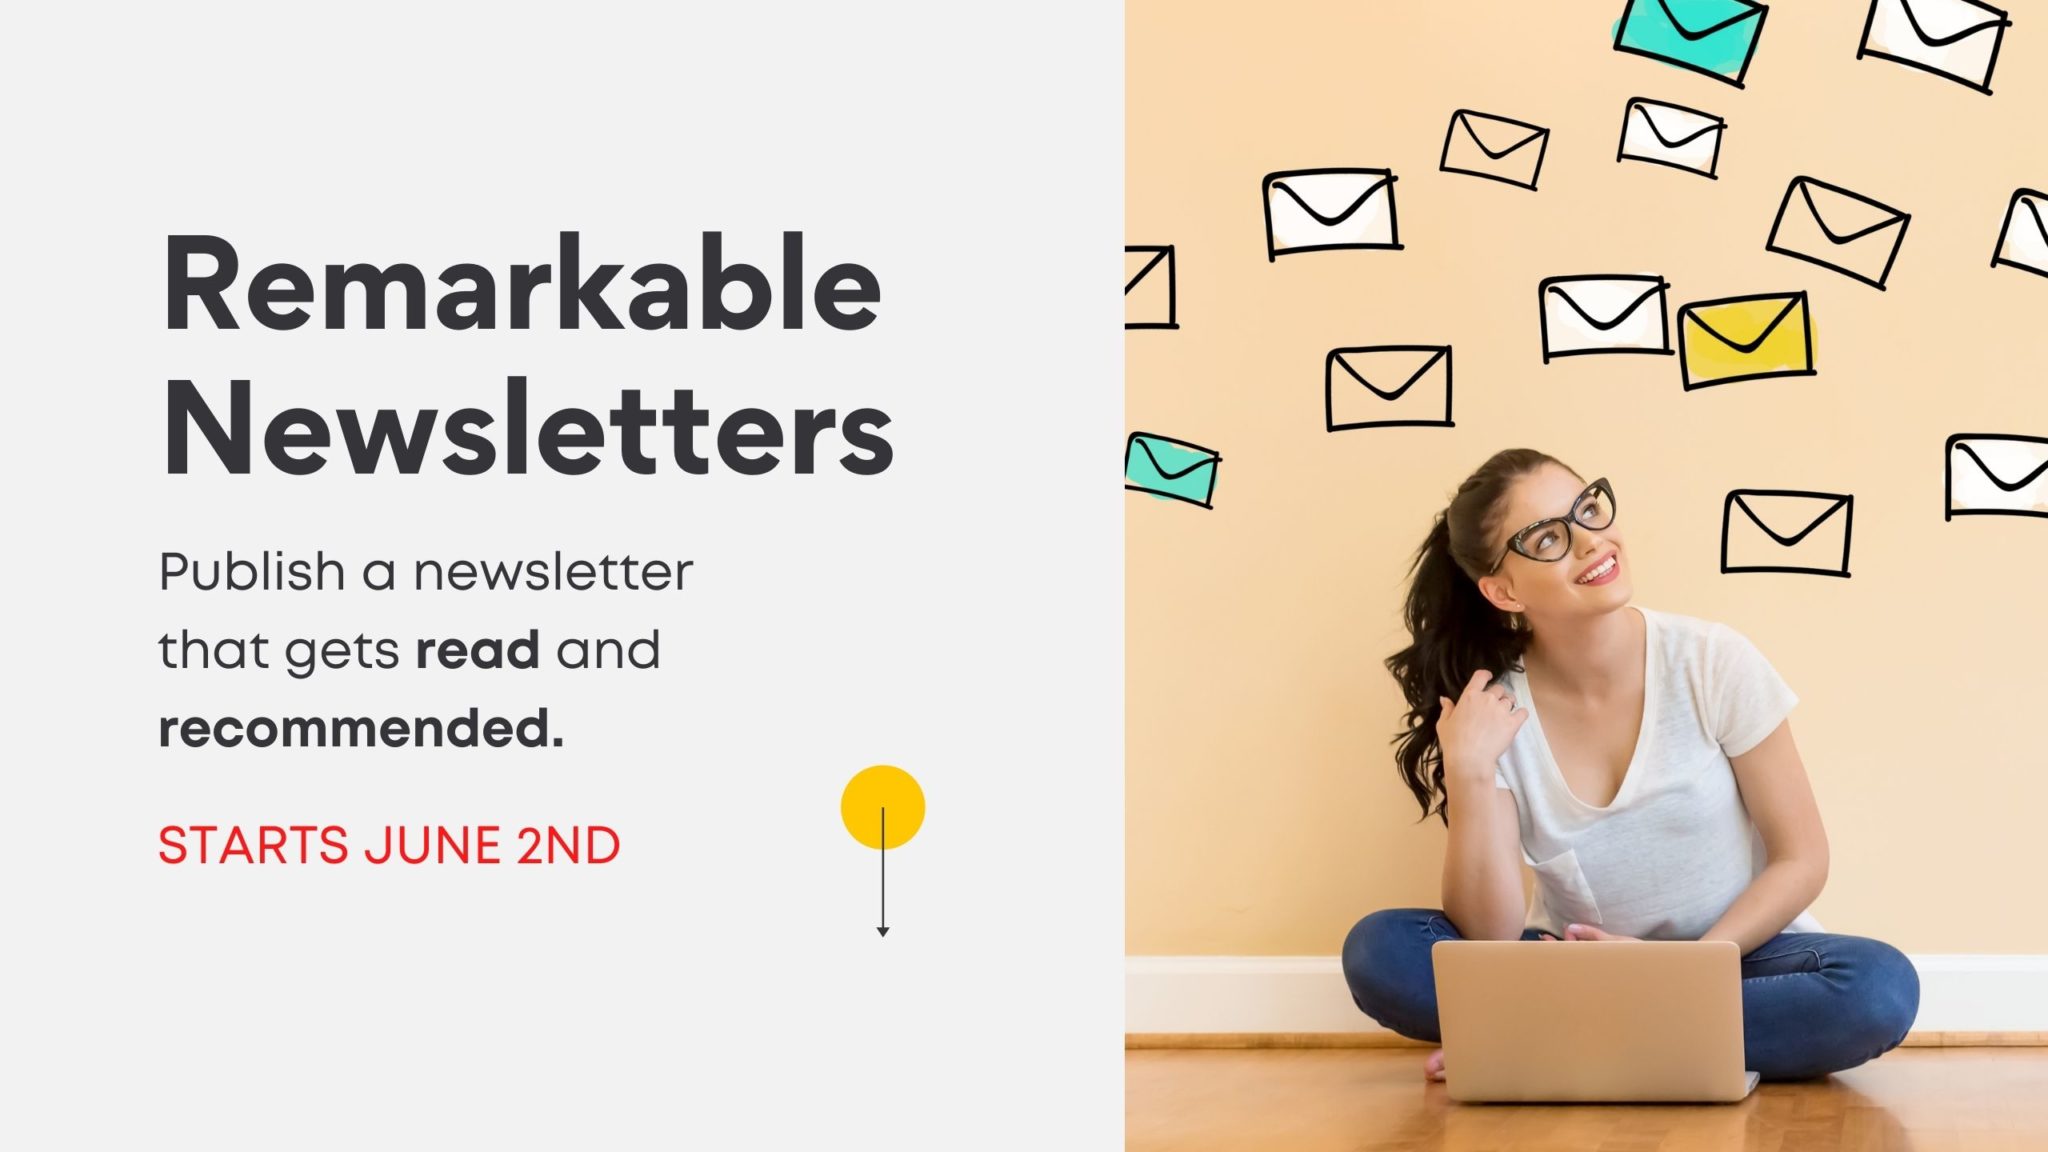 Remarkable Newsletters